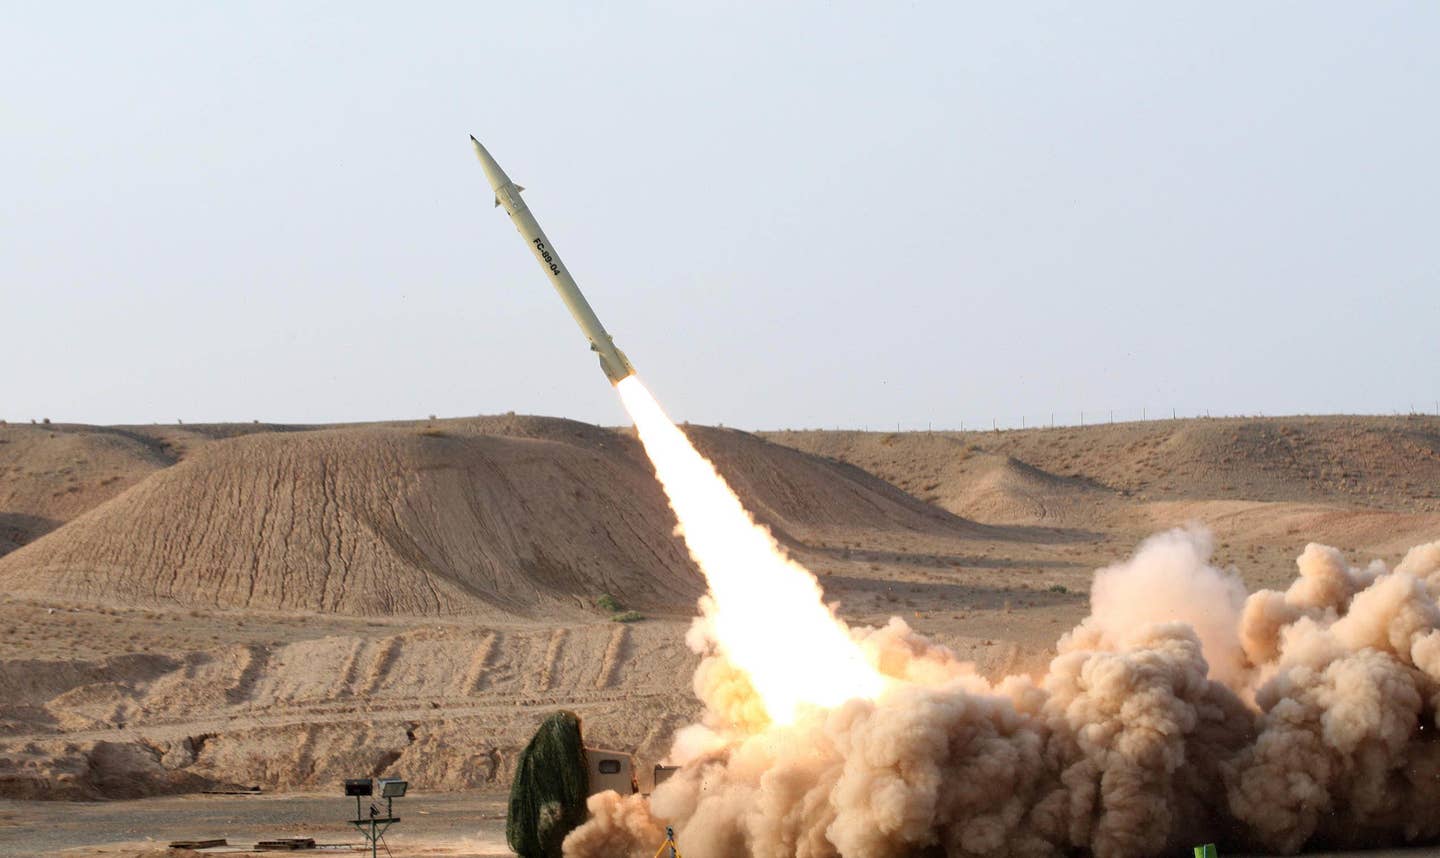 Ukraine intelligence officials said that Iran would provide the Fateh 110 missile to Russia sometime this month. (Photo by Mohsen Shandiz/Corbis via Getty Images)